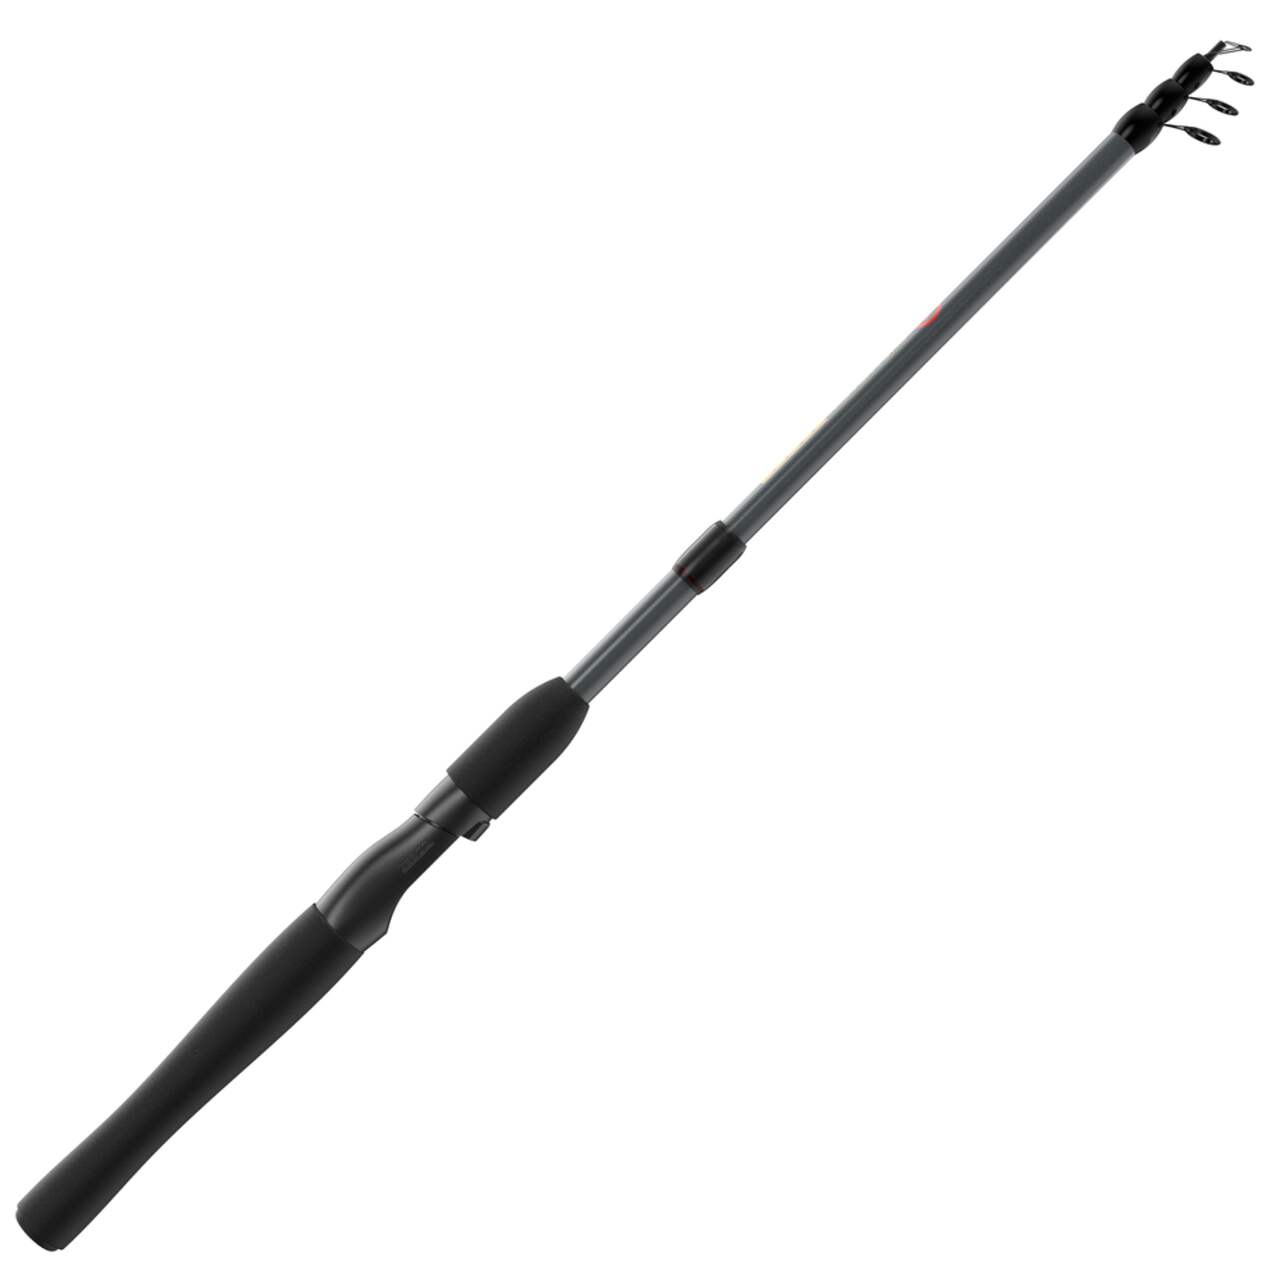 https://media-www.canadiantire.ca/product/playing/fishing/fishing-equipment/0772968/zebco-adventure-telescopic-spinning-rod-6--7c2953e9-392c-4dce-84e9-cccc027774a1.png?imdensity=1&imwidth=640&impolicy=mZoom